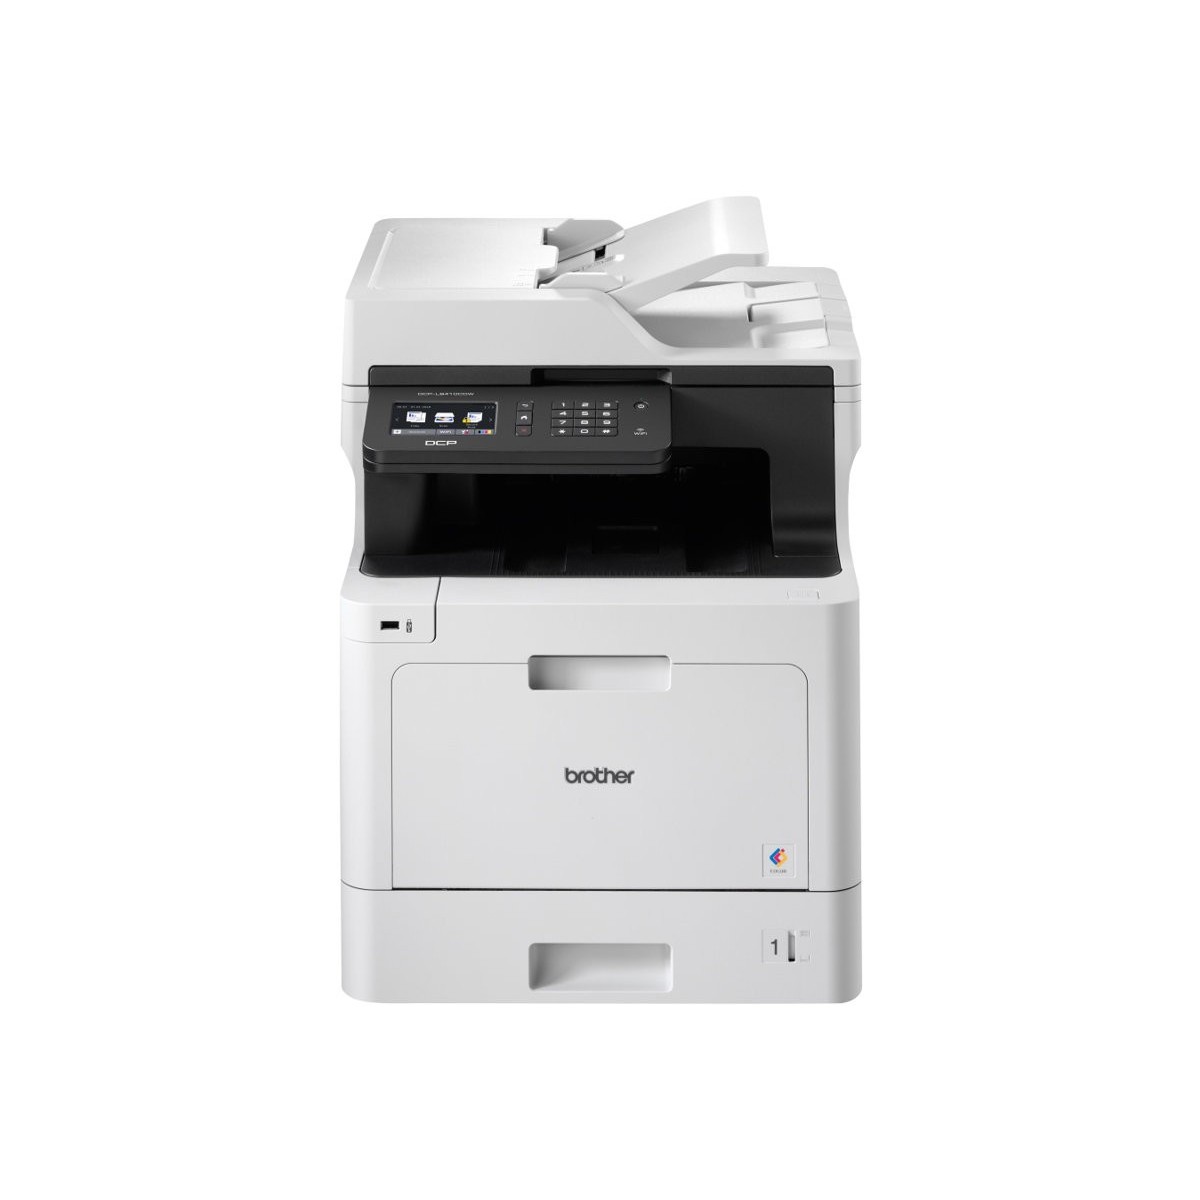 Brother DCP-L8410CDW MFP ColorL. 31PPM  - Multi language - Laser/Led - 1,000 Mbps